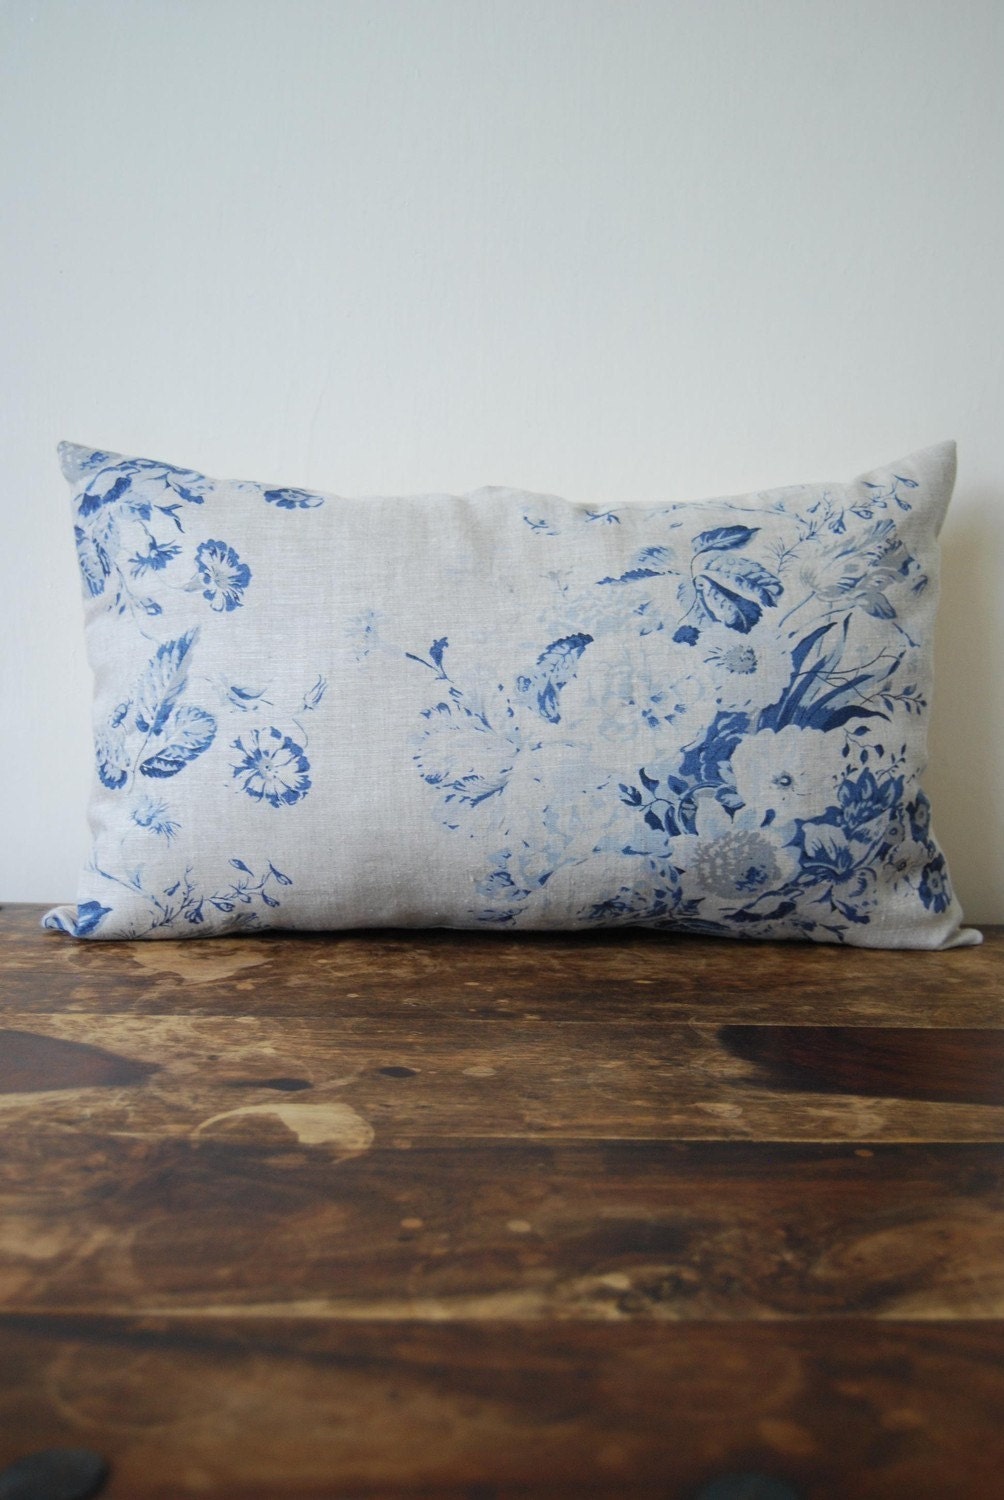 Shabby chic pillow floral blue and white roses linen cushion with kapok